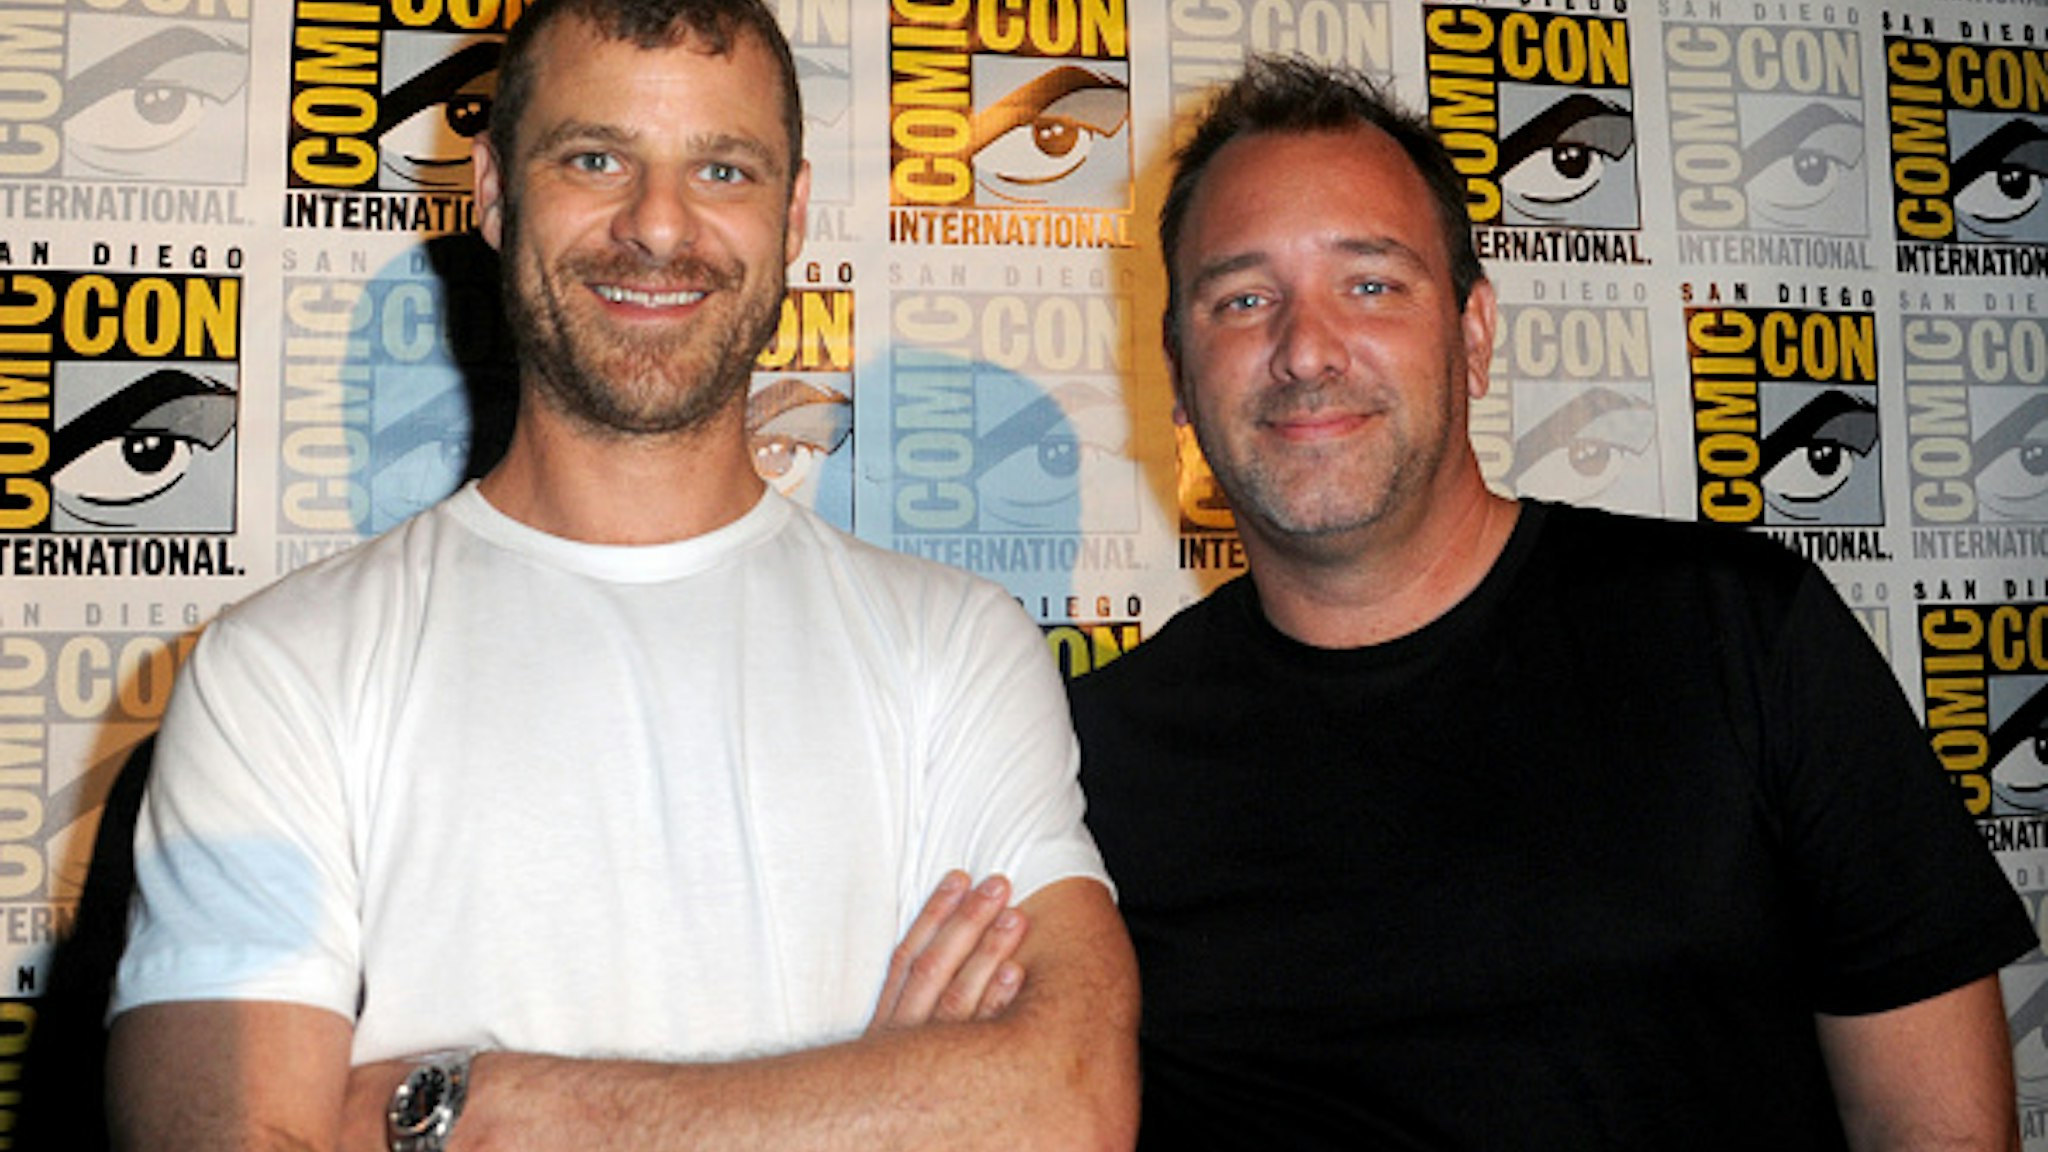 SAN DIEGO, CA - JULY 22: Writers/producers Trey Parker (L) and Matt Stone attend Comedy Central "South Park 20" during Comic-Con International 2016 at San Diego Convention Center on July 22, 2016 in San Diego, California.